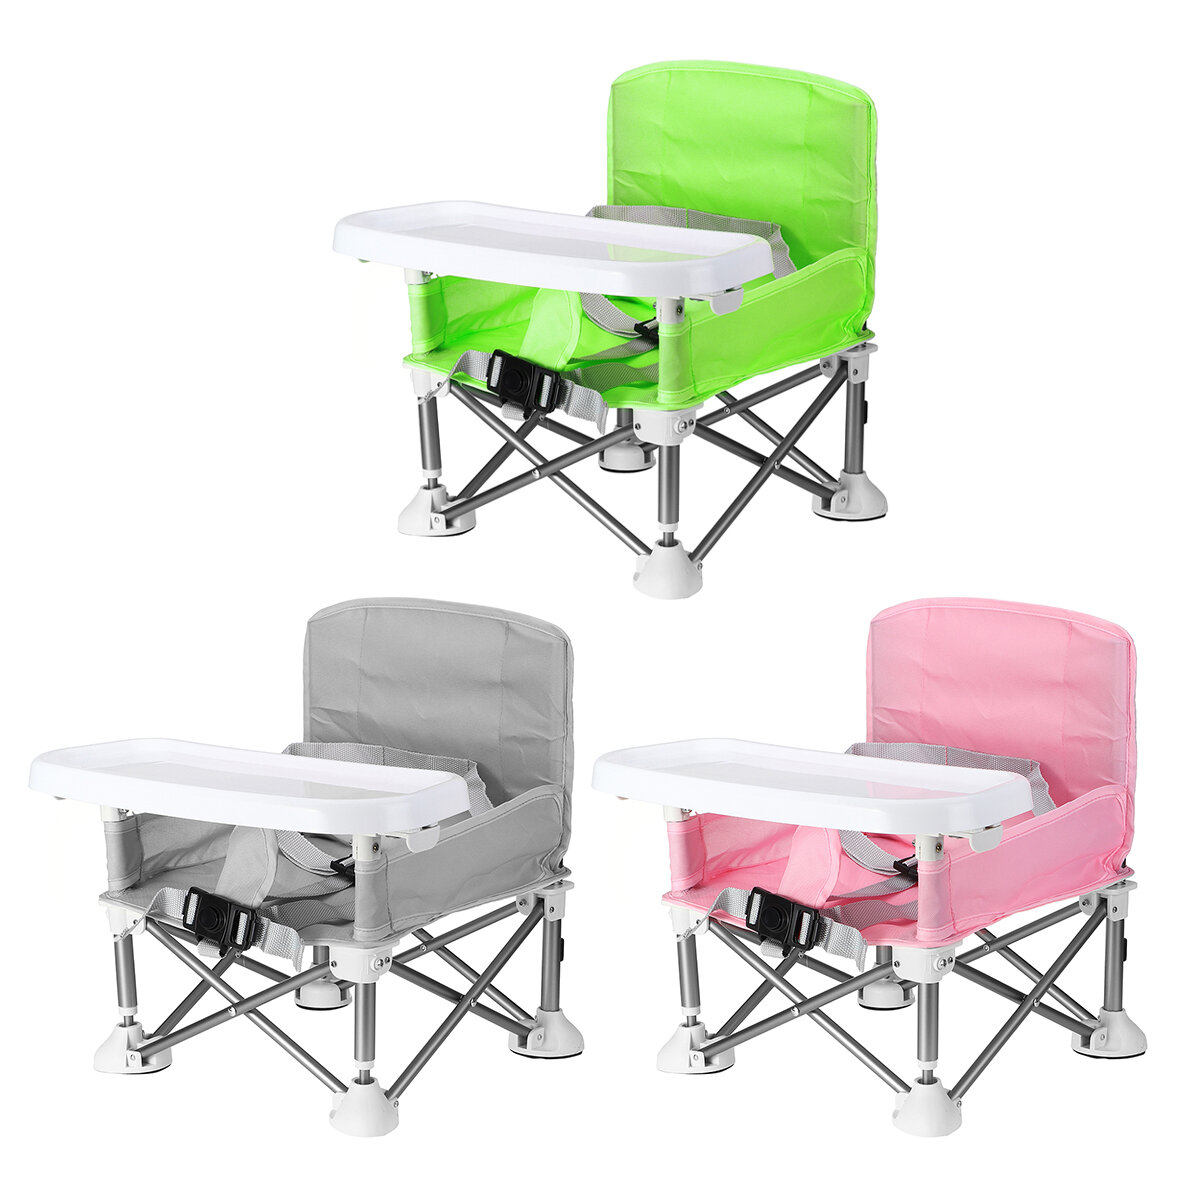 

Baby's Foldable Eating Table Multi-function Aluminium Alloy Portable Dining Seats for Outdoor Outings Home Supplies